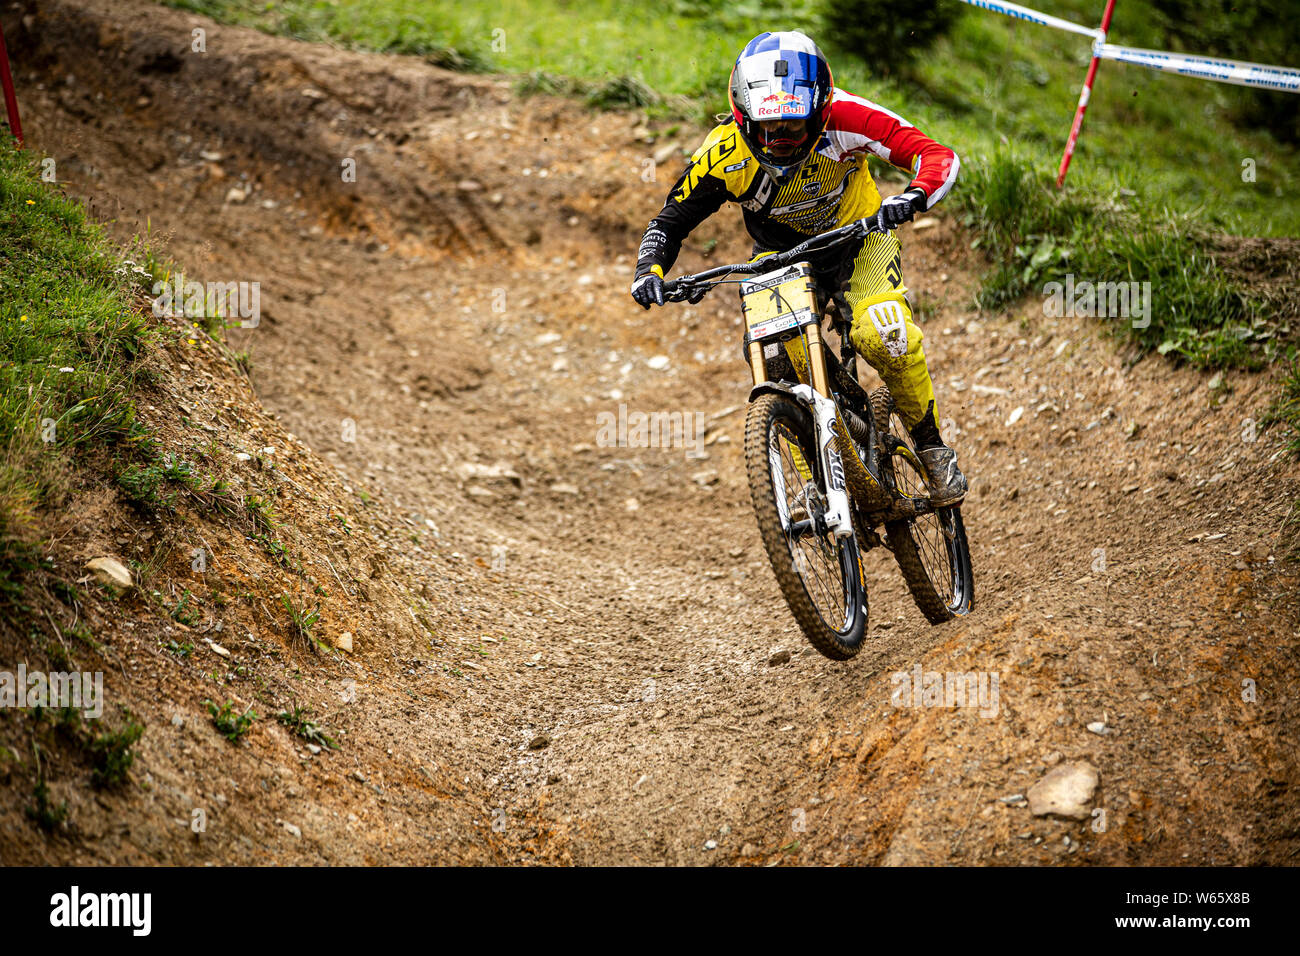 SEPTEMBER 20, 2013 - LEOGANG, AUSTRIA. Rachel Atherton (GBR) racing at the UCI Mountain Bike Downhill World Cup. Stock Photo